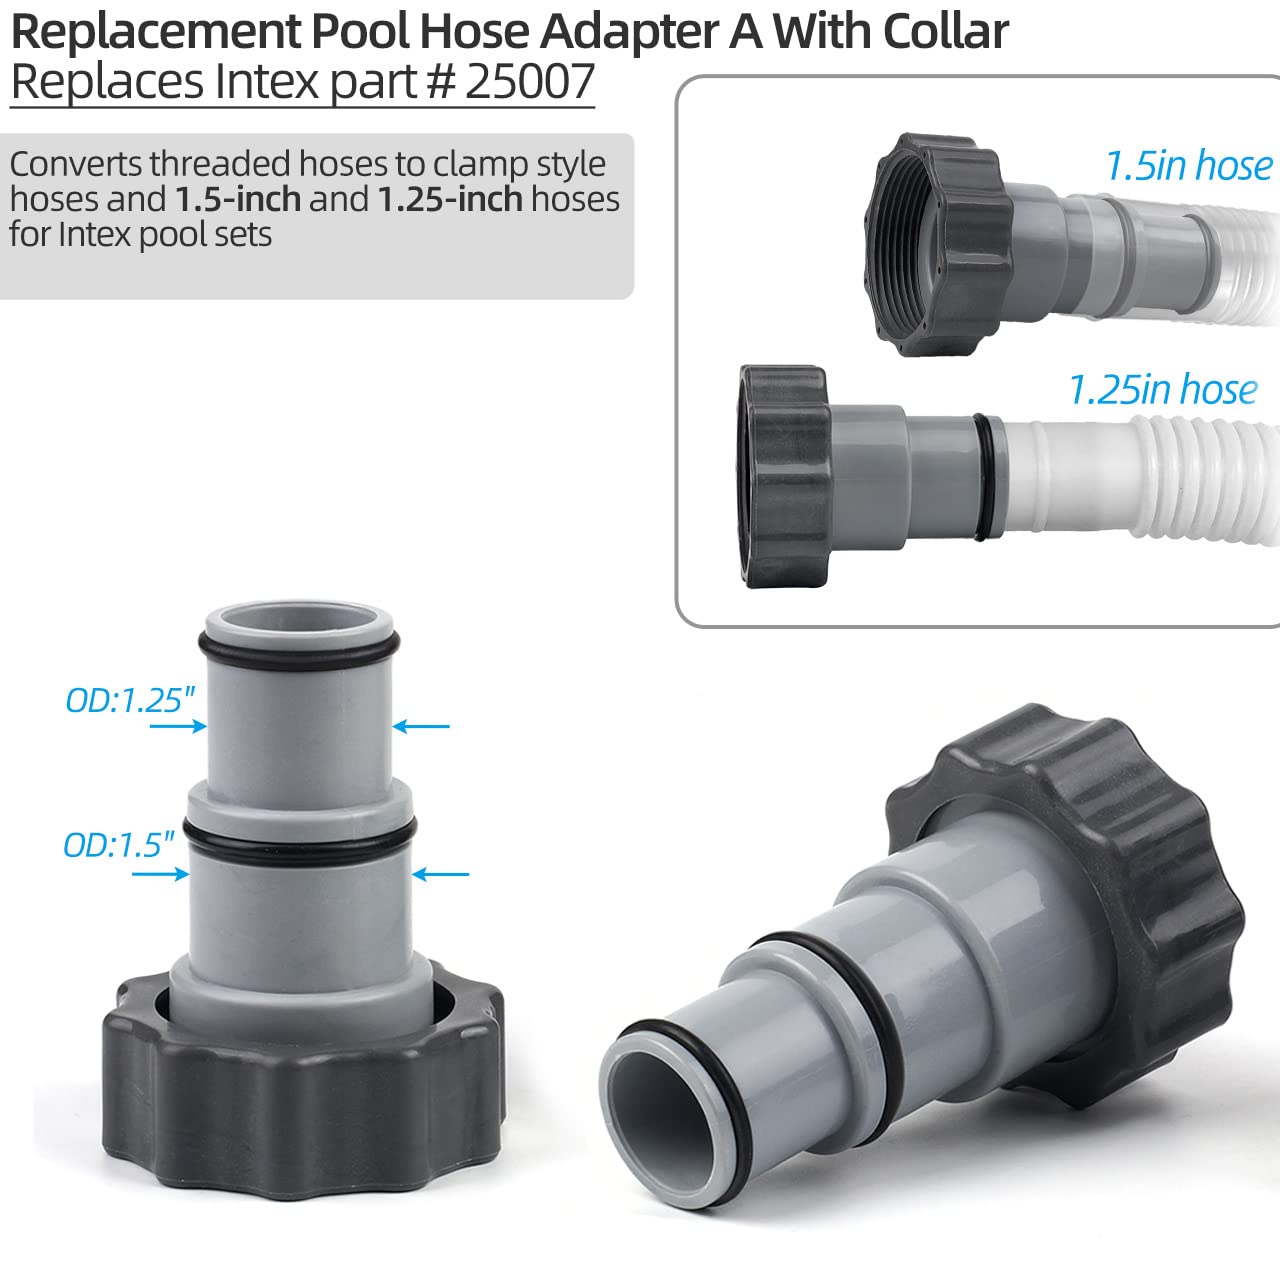 Pool Hose Adapter A with Collar for Intex Threaded Connection Pump, Converts 1.5 & 1.25-inch Hoses (2 Pack)